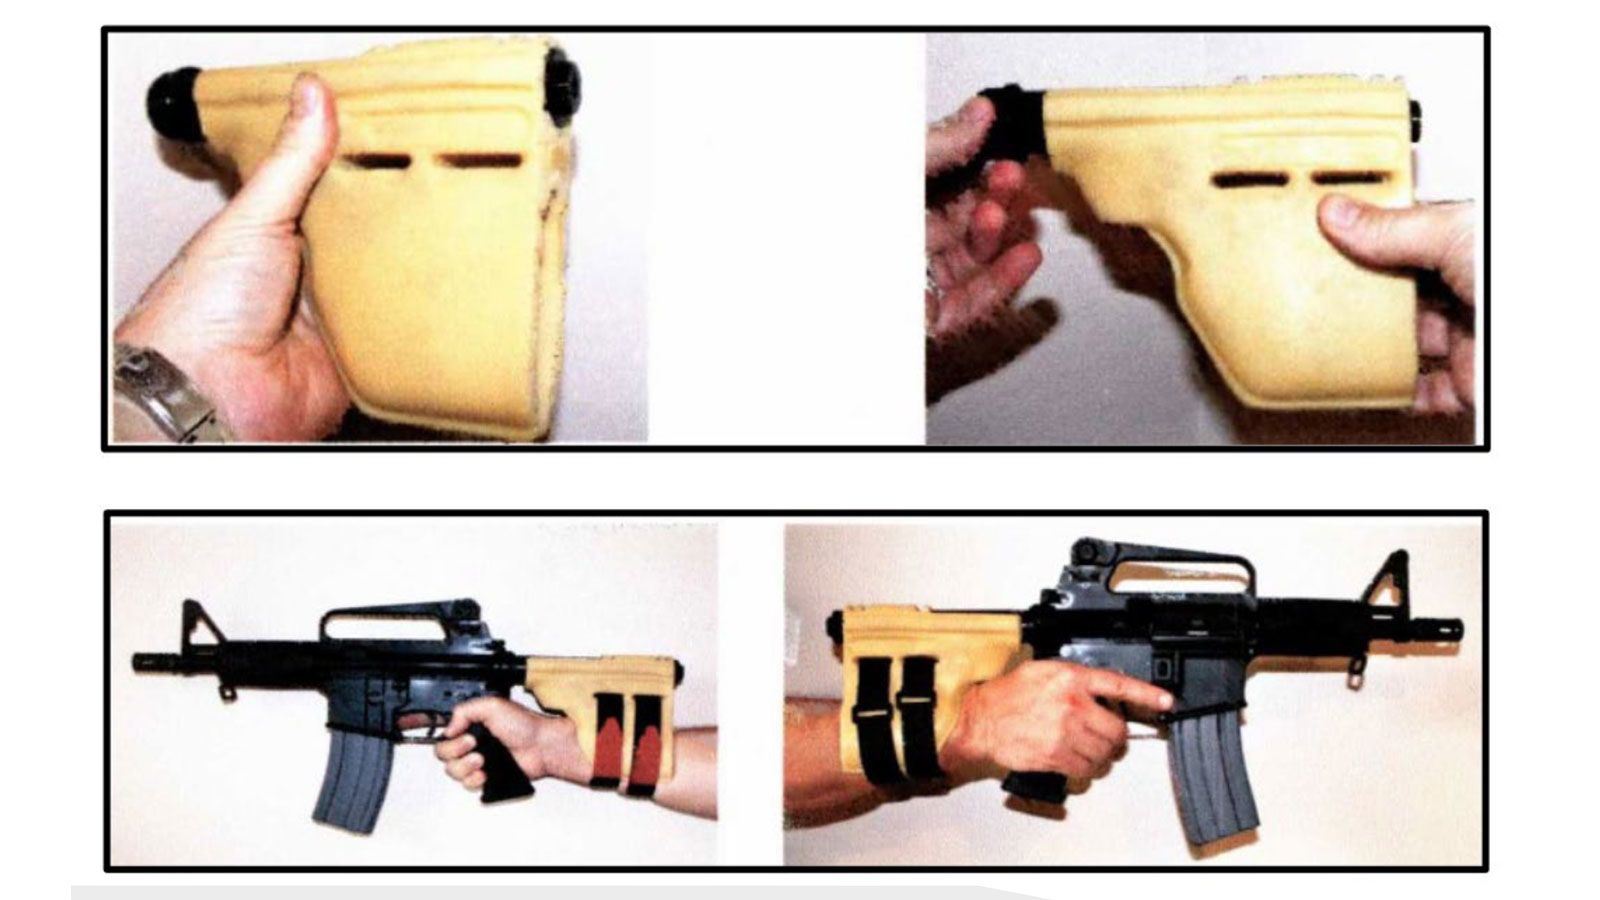 Pistol Braces & The ATF: What You Need to Know [UPDATED] - Pew Pew Tactical